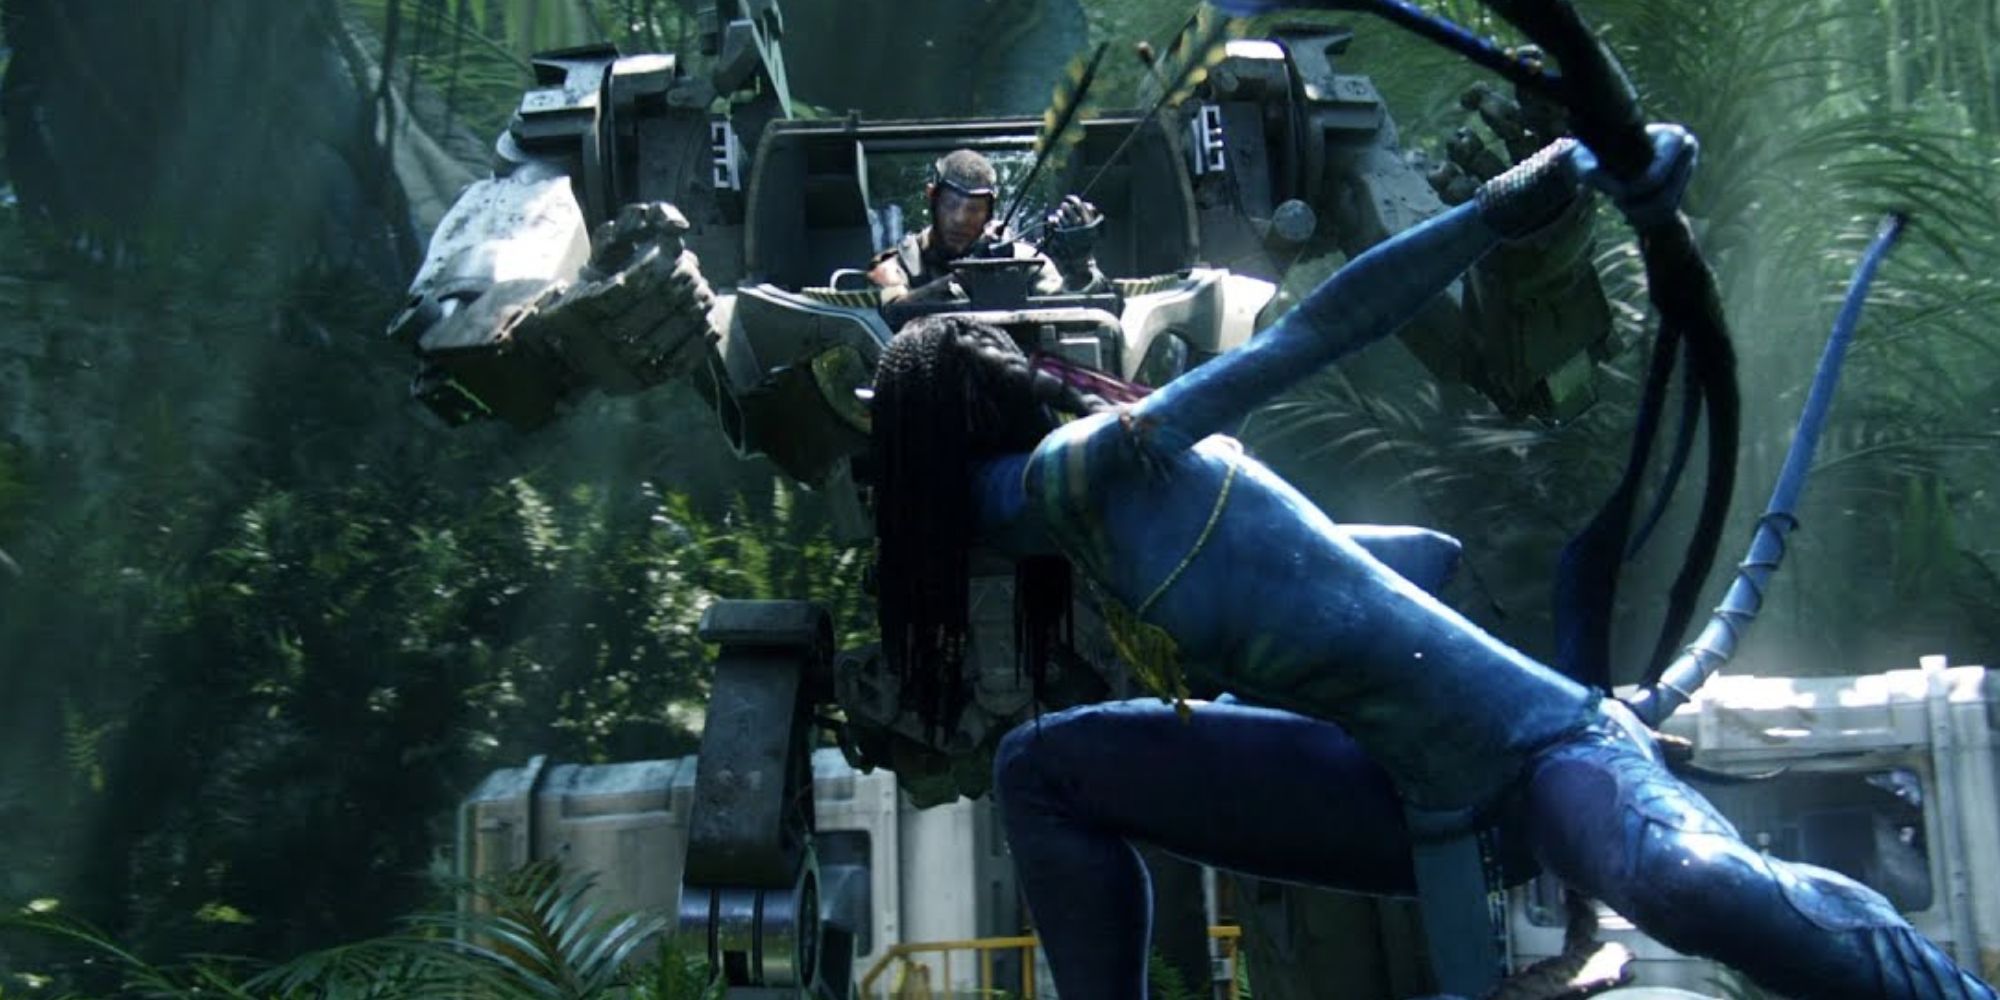 Stephen Lang as Miles Quaritch fighting the Na'vi in his mech suit in Avatar